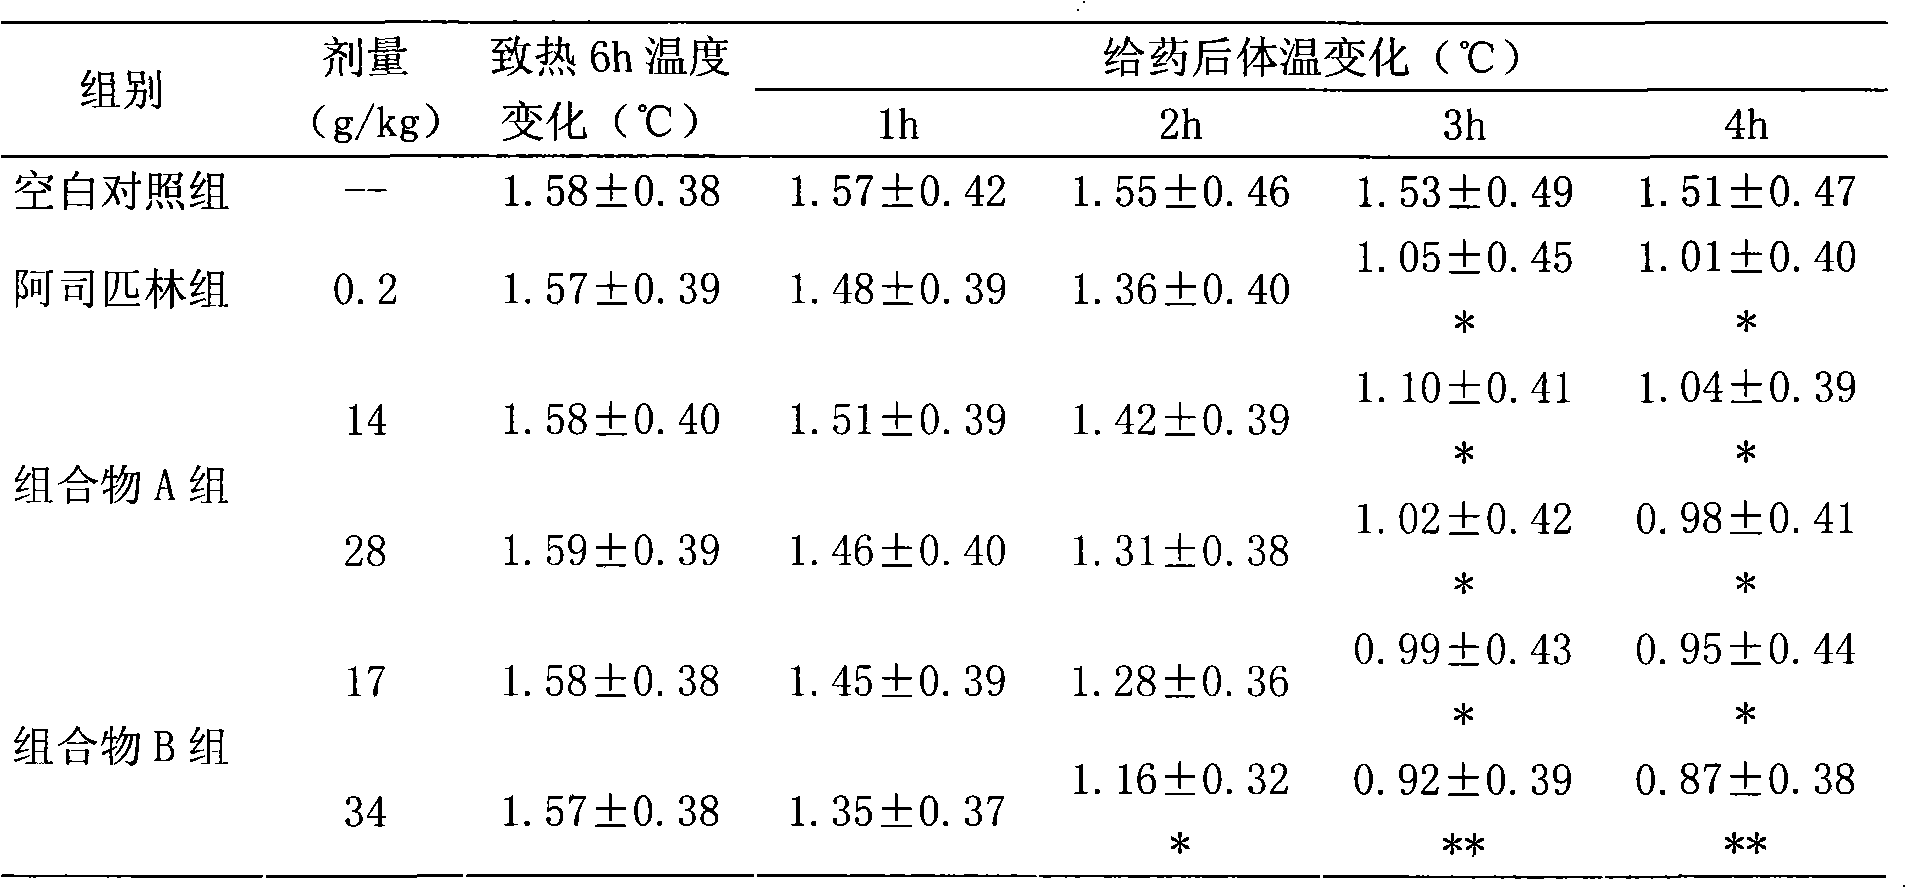 Chinese medicinal composition for treating common cold, acute and chronic tracheitis and preparation method thereof